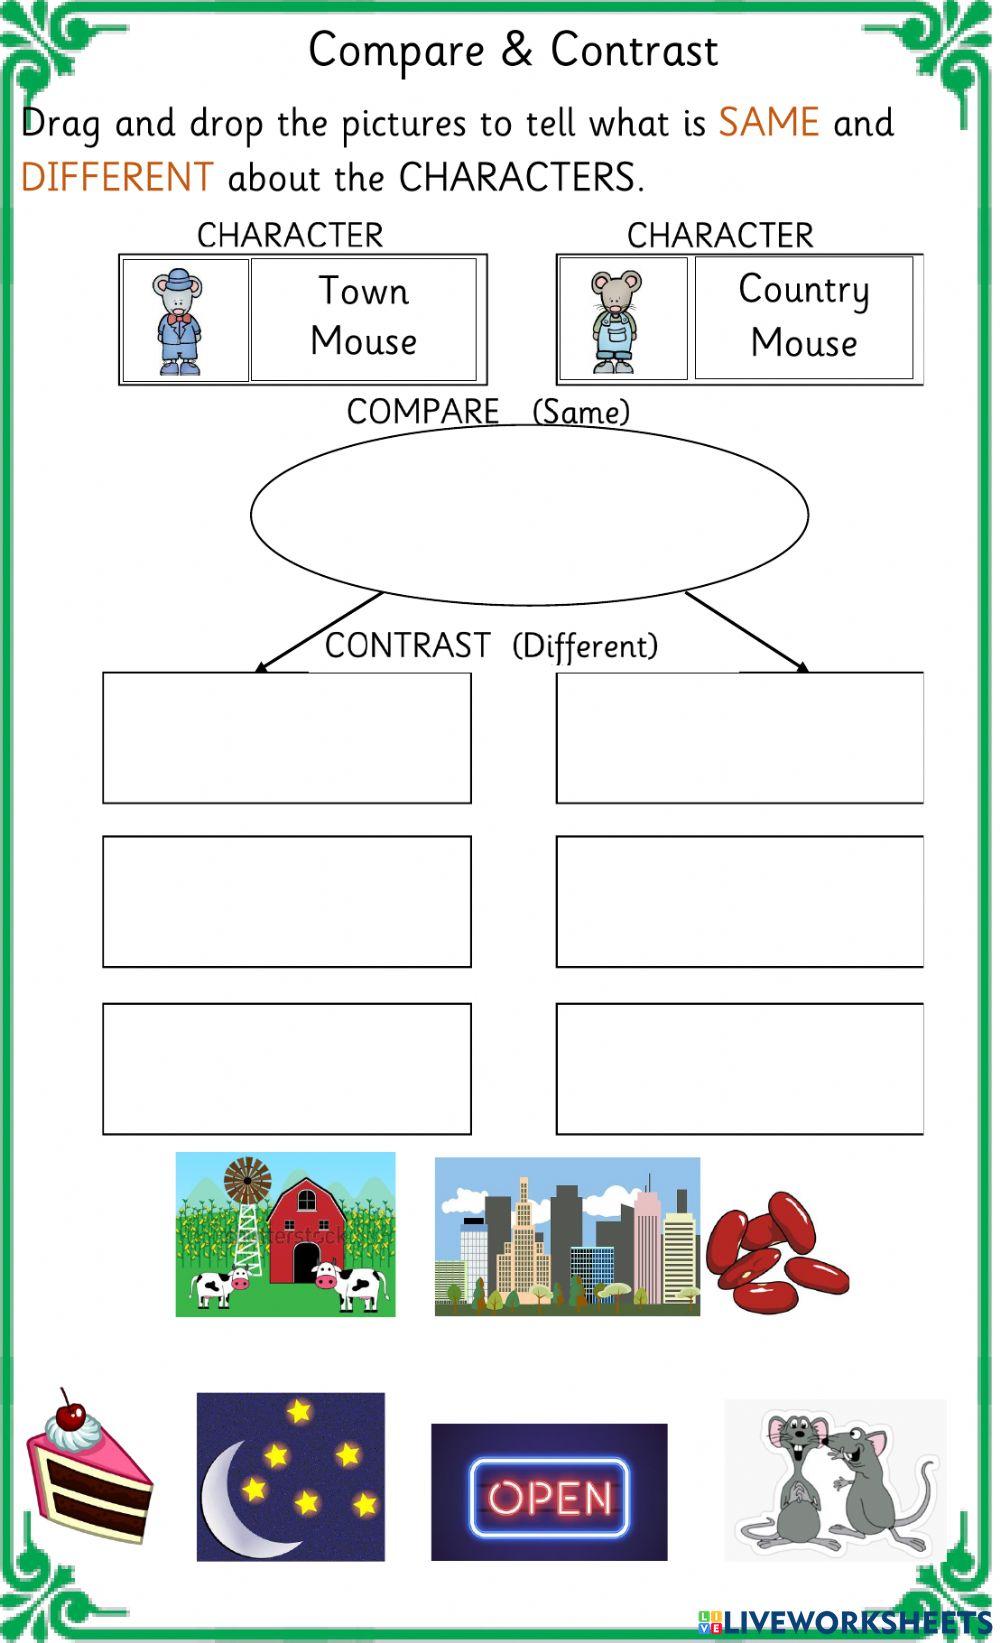 Compare & Contrast - Country Mouse & Town Mouse